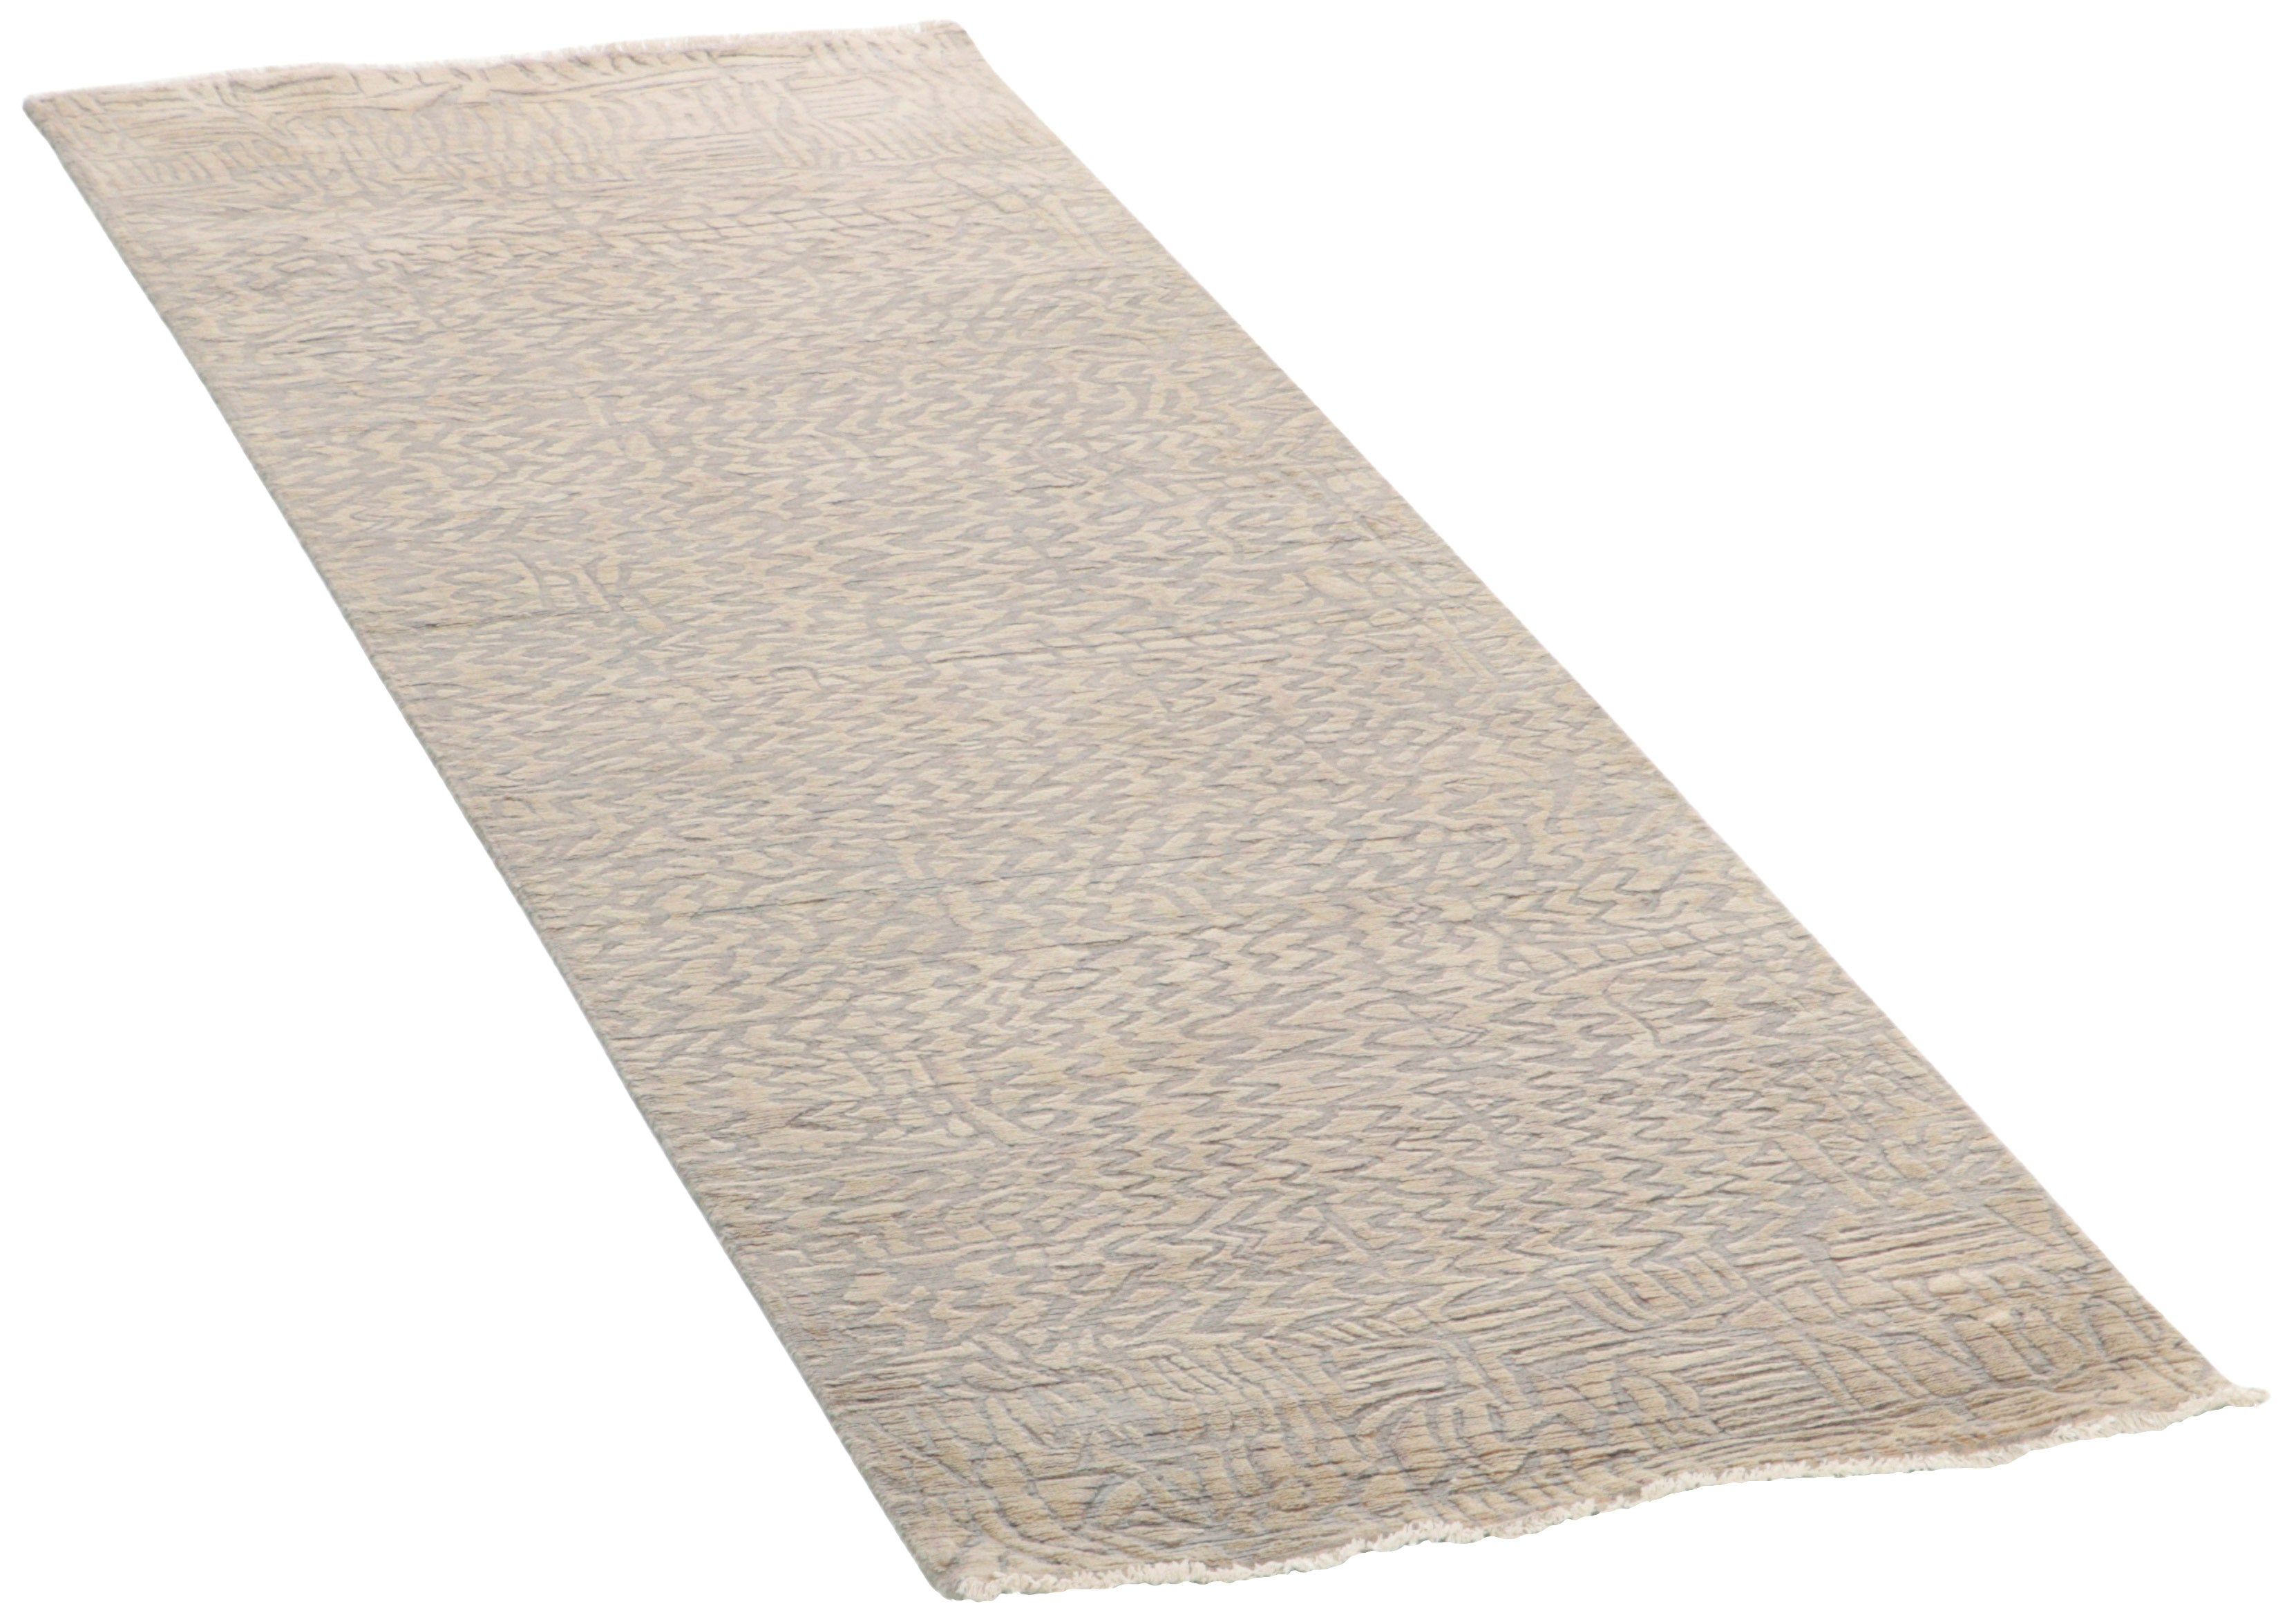 Beige runner  with a damask pattern